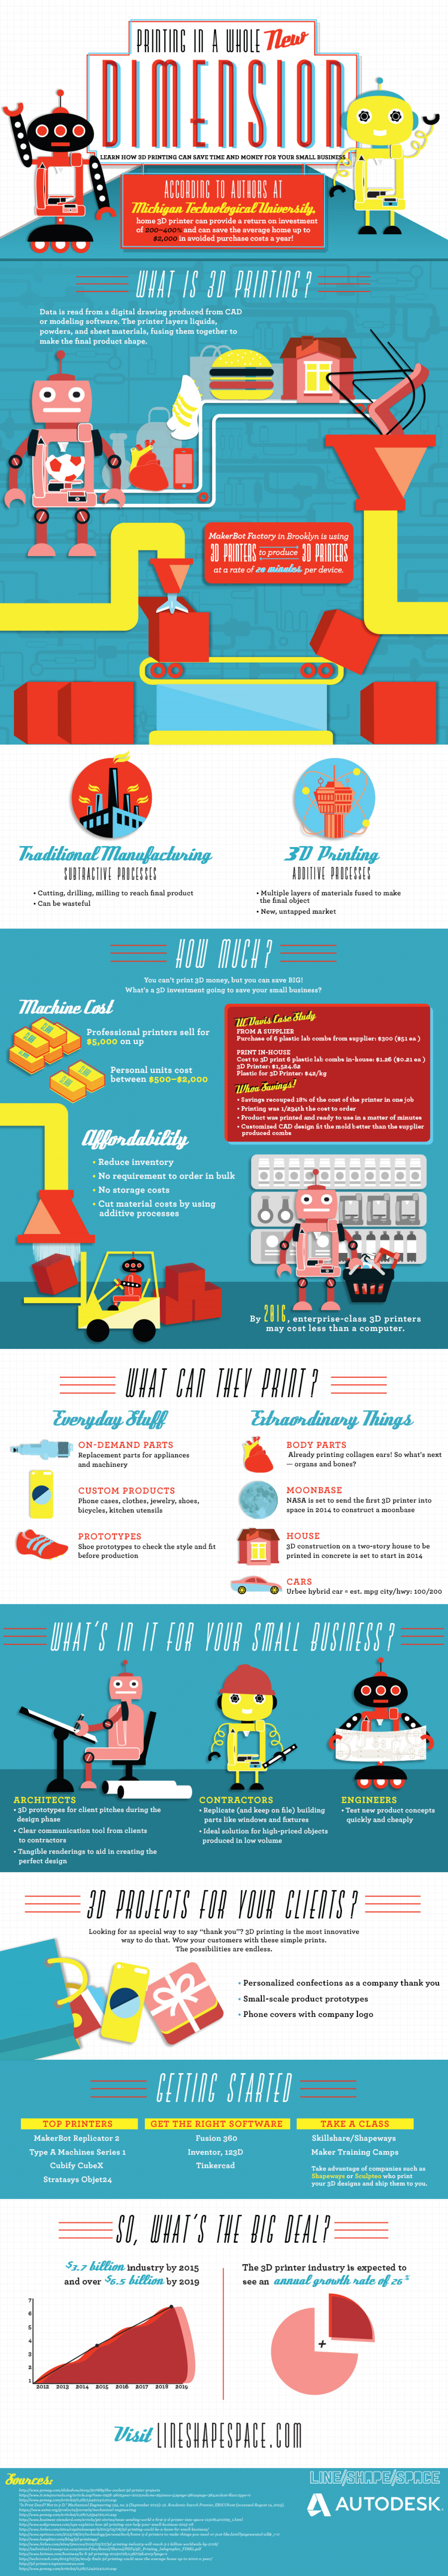 Printing in a Whole New Dimension Infographic